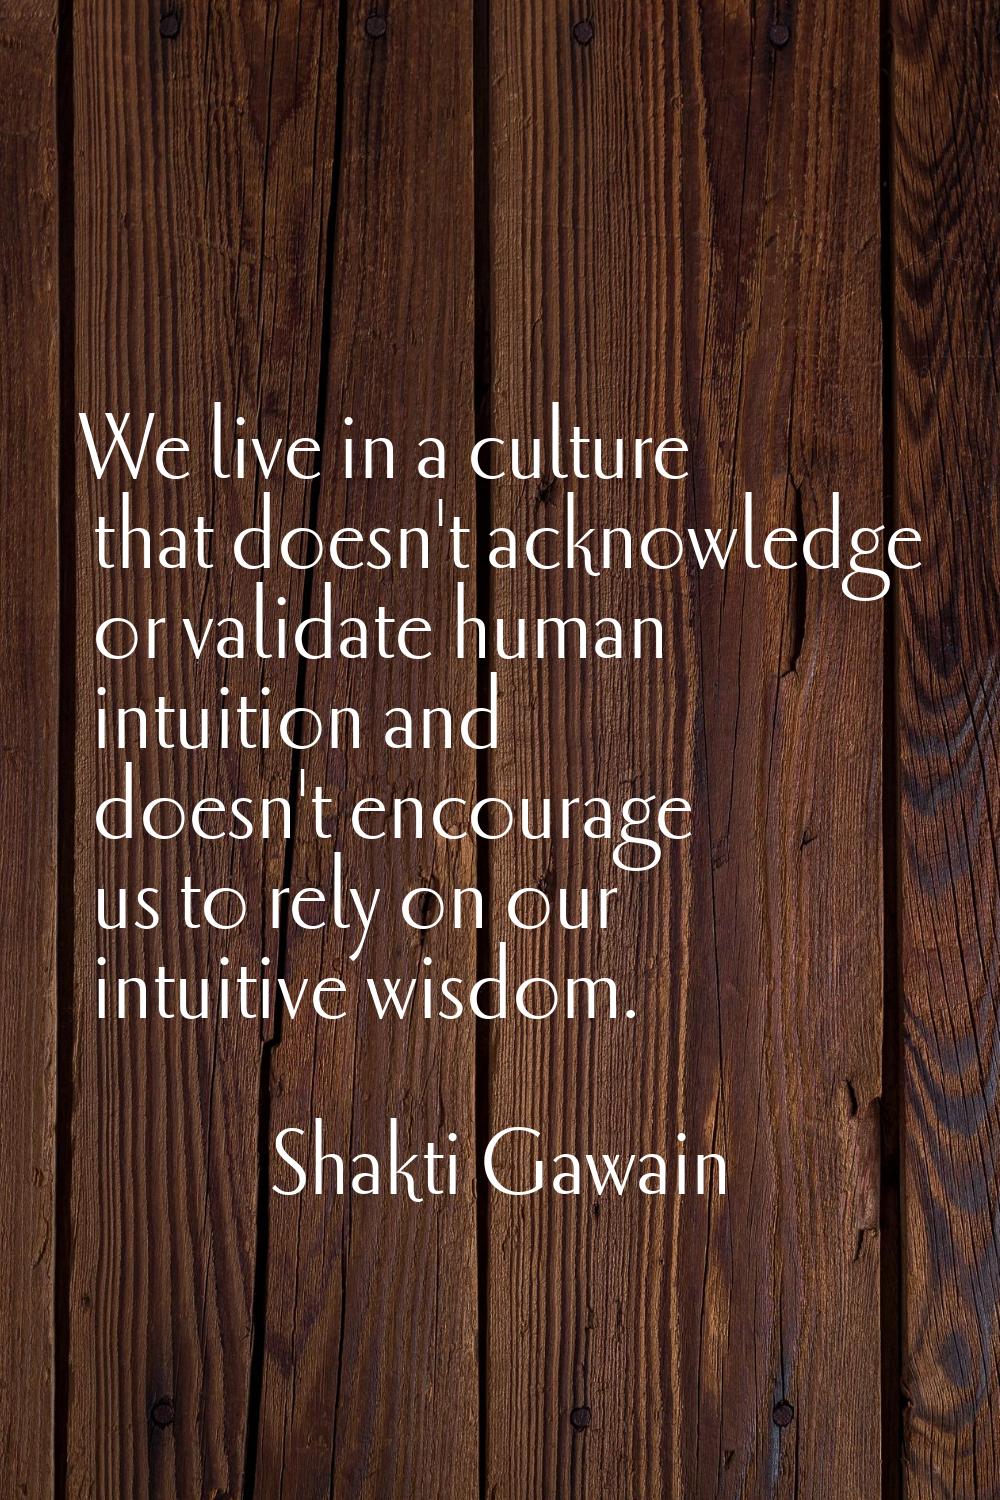 We live in a culture that doesn't acknowledge or validate human intuition and doesn't encourage us 